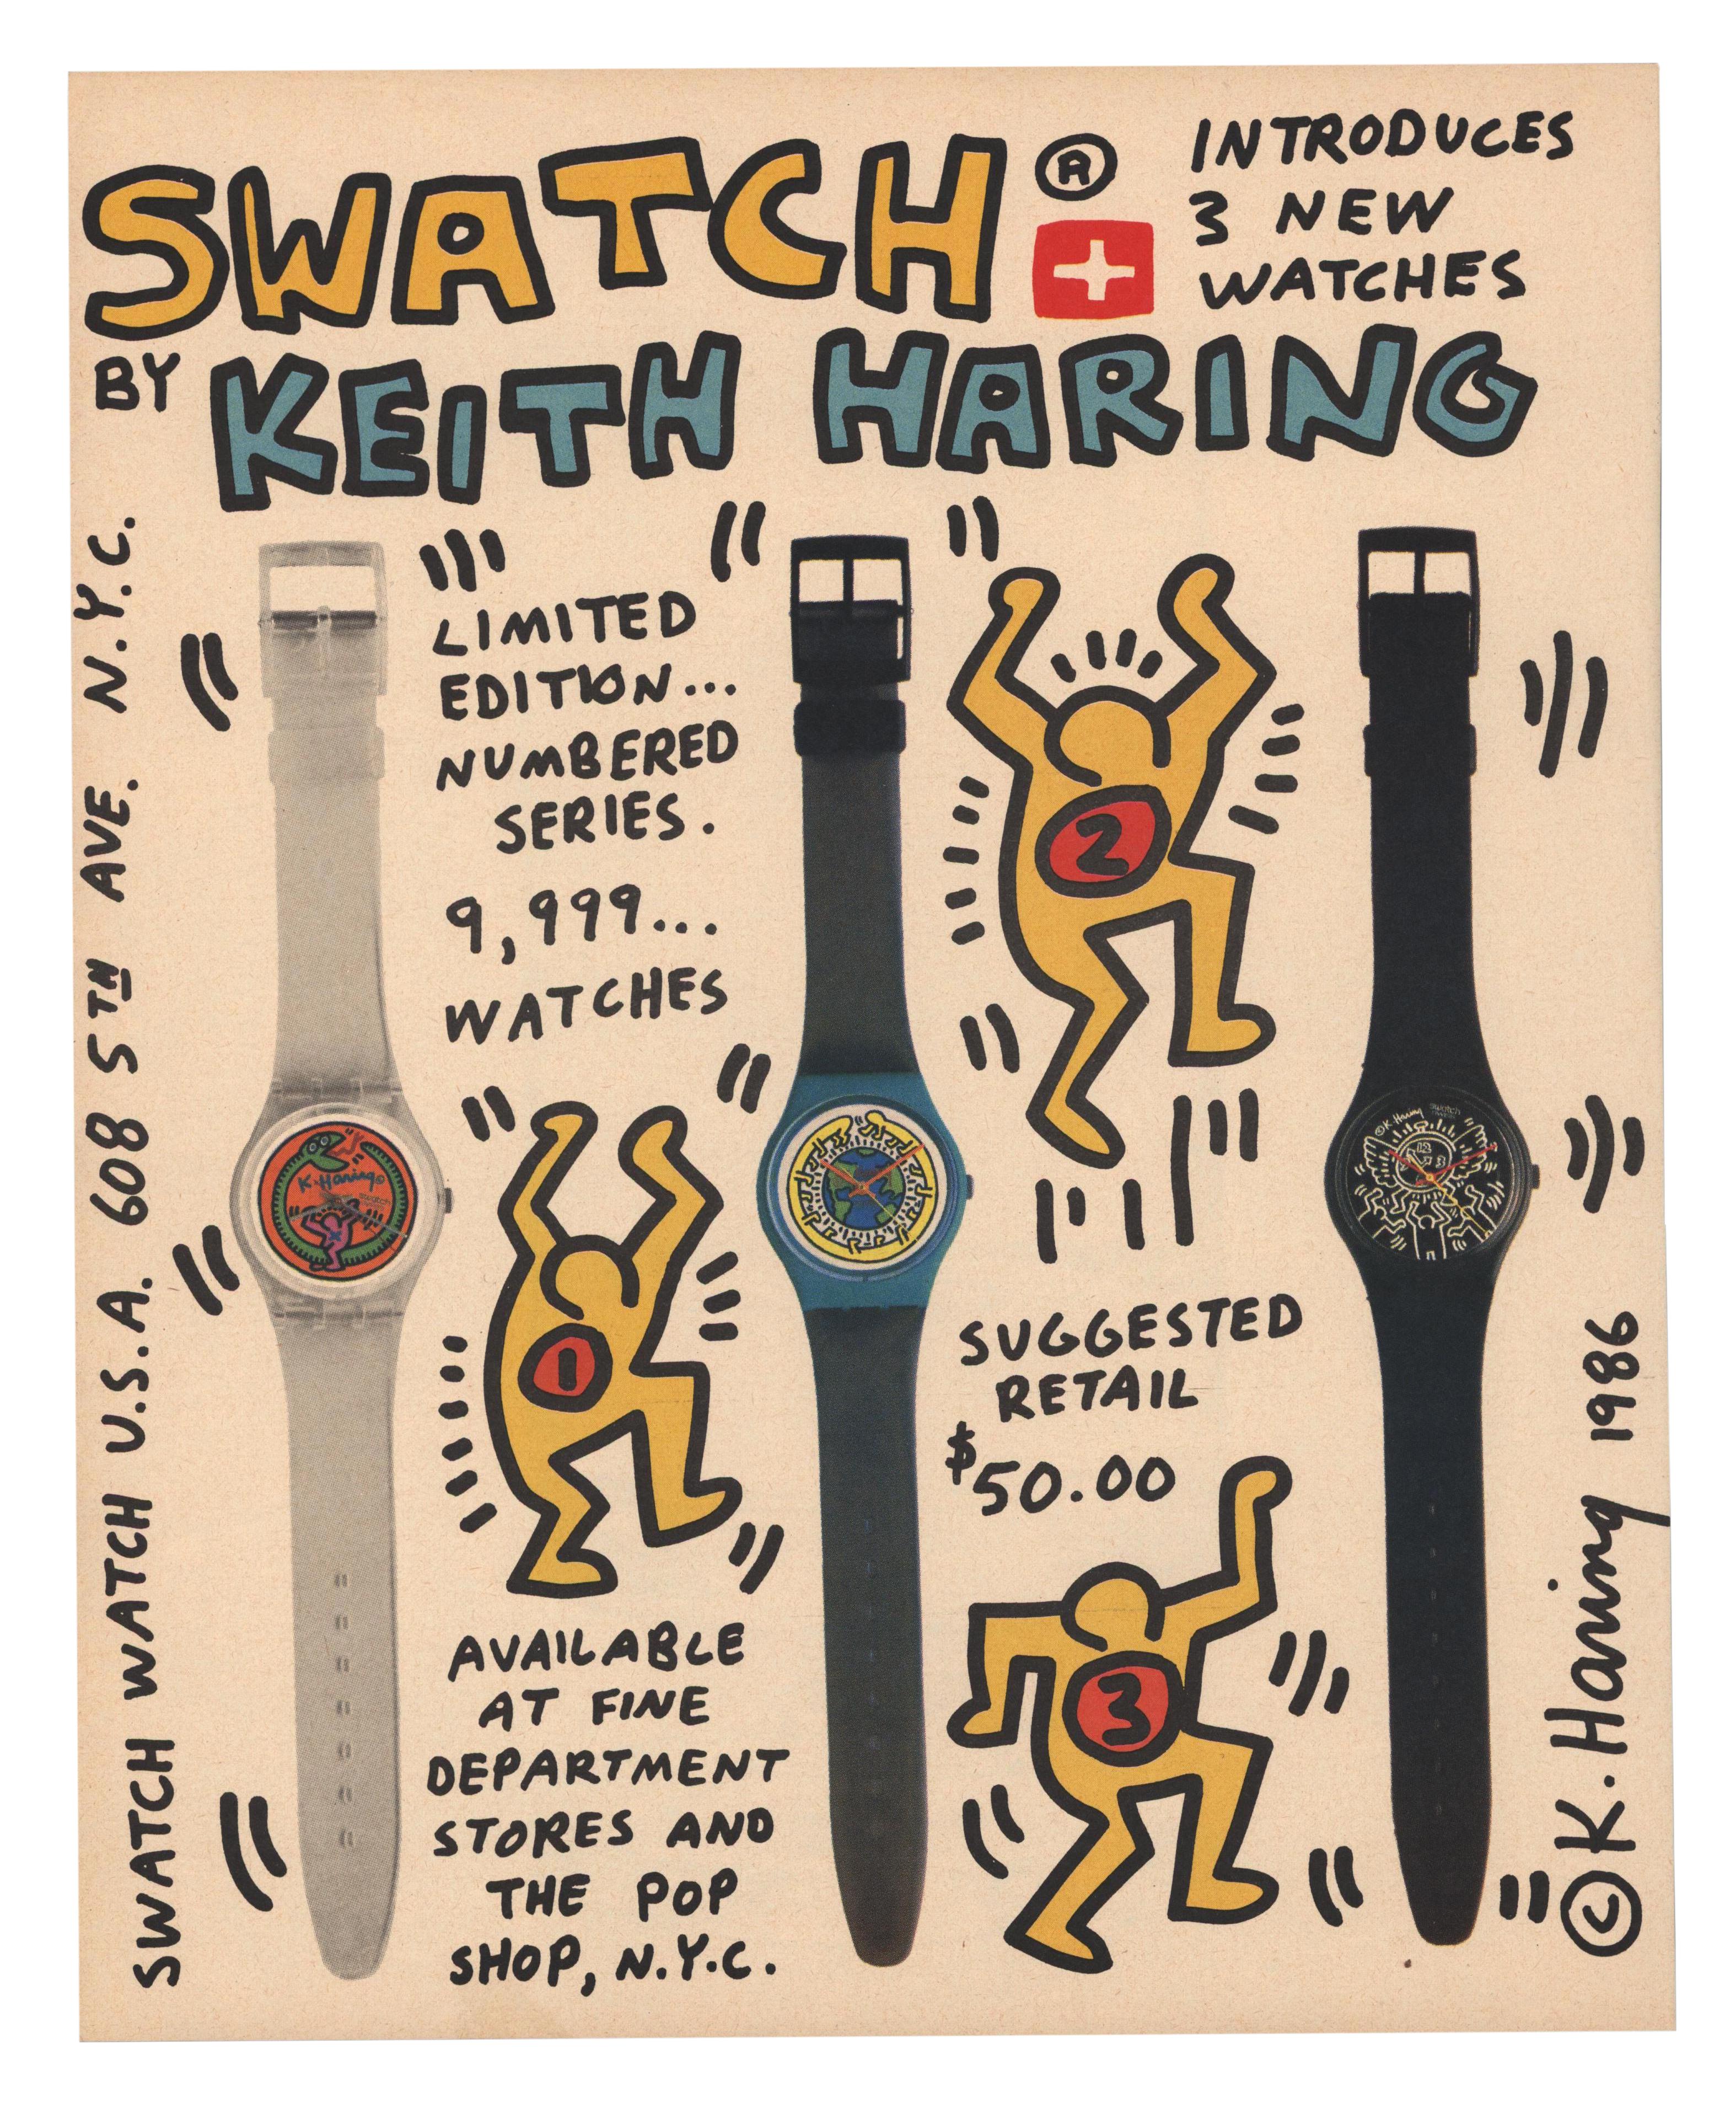 1980s/1990s Keith Haring ephemera collection: 
A collection of 20+ Keith Haring ephemera pieces ranging mostly from 1982 to circa mid-1990s. Highlights include a 1980's Haring designed Swatch ad; 1980s Keith Haring Pop Shop stickers; 1990s Keith